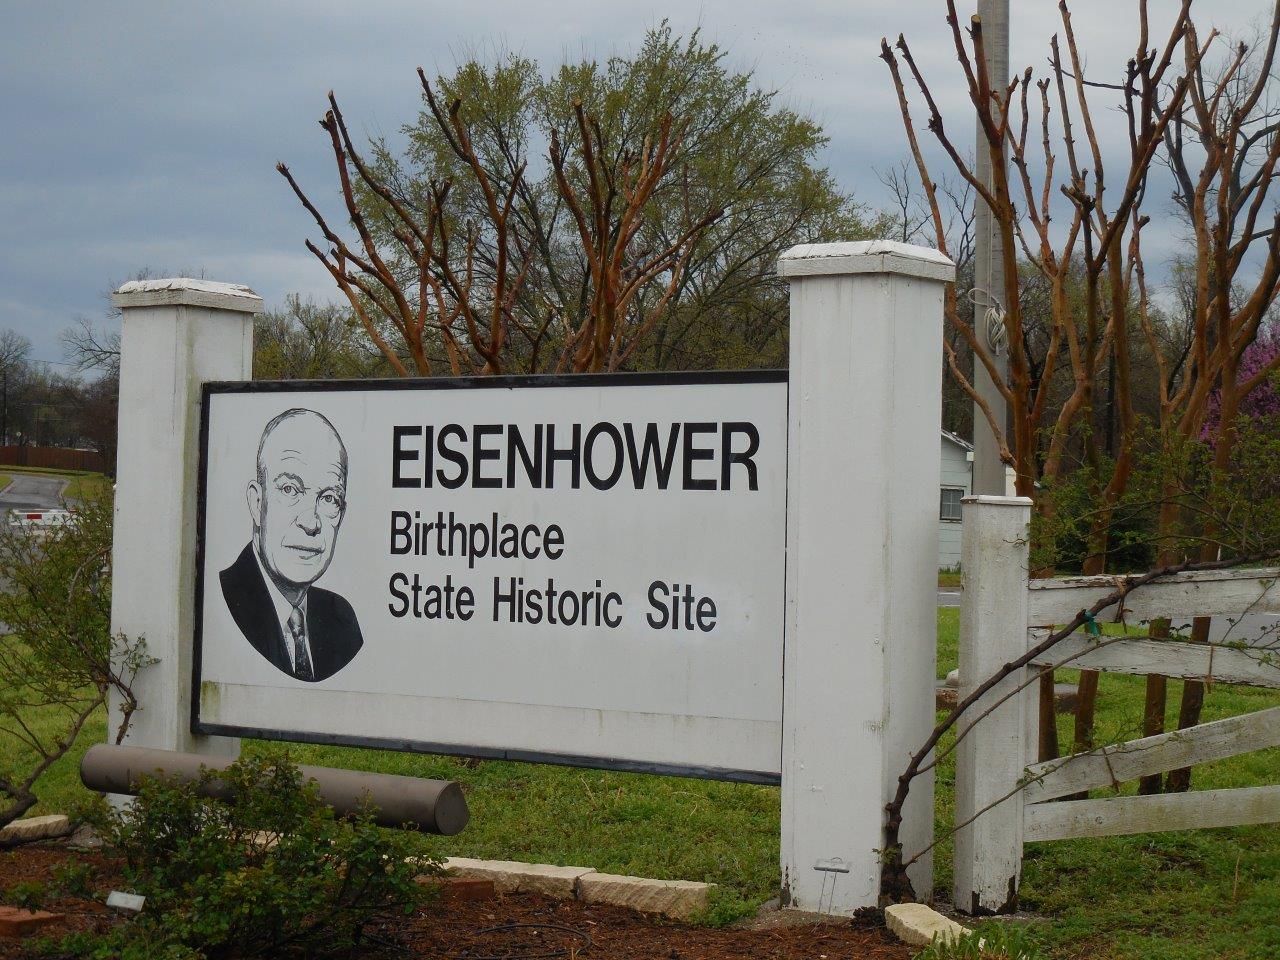 Dwight Eisenhower birthplace state historic site sign